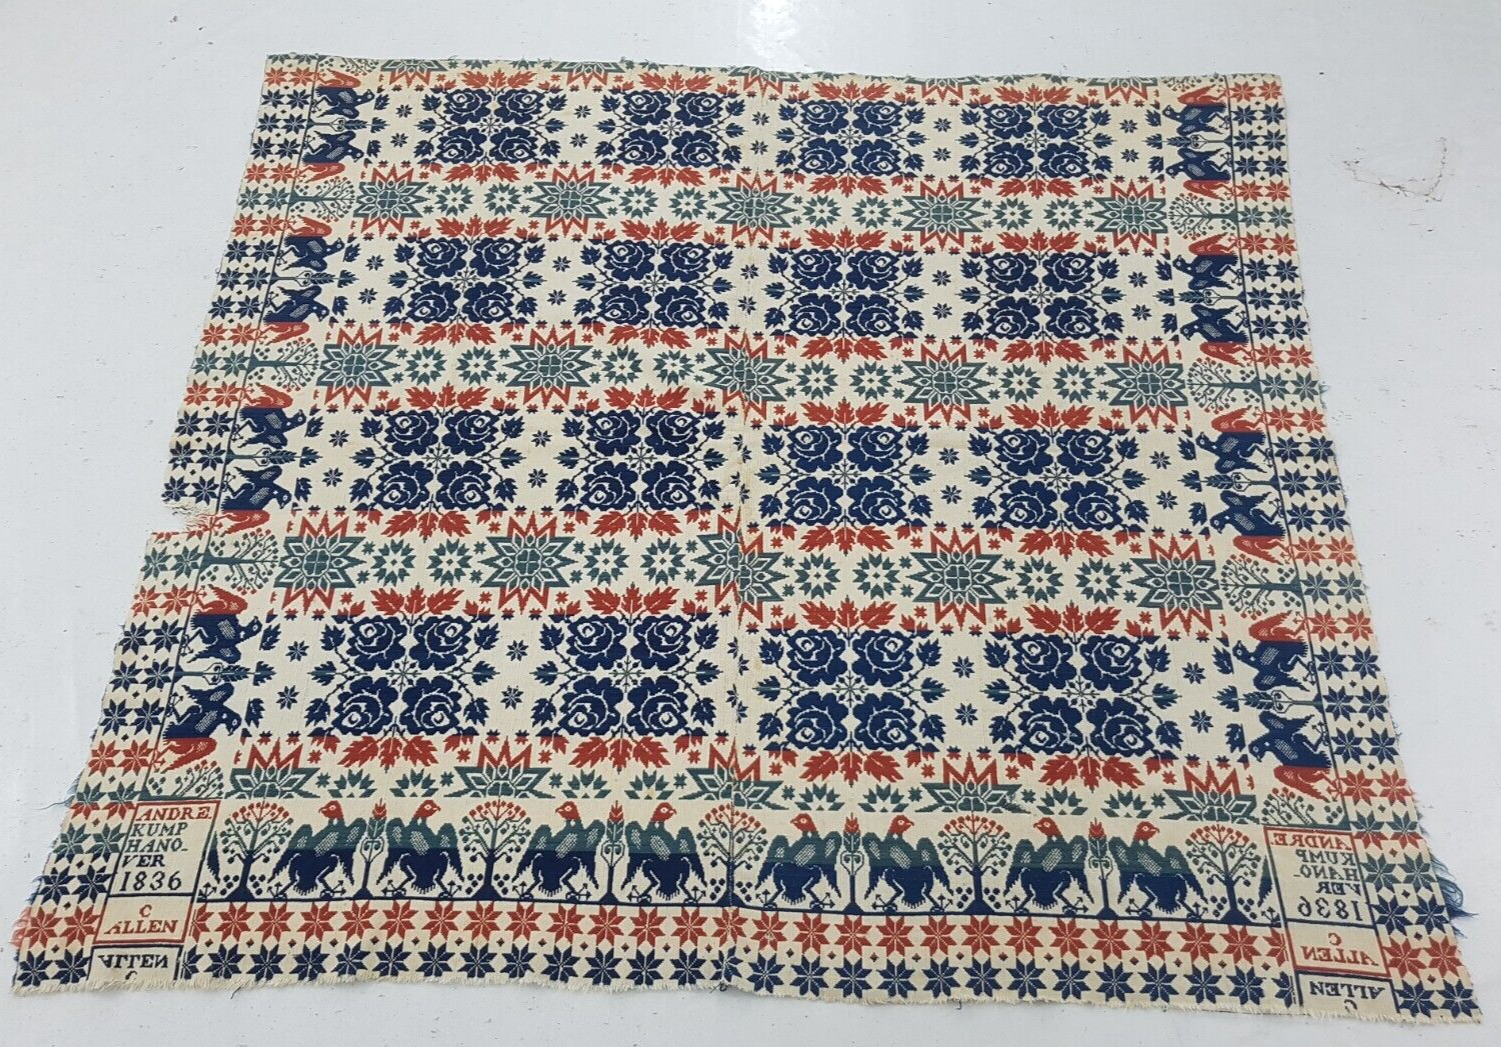 1836 Antique American ANDRE Reversible Loom Woven Jacquard Coverlet 190x180 cm